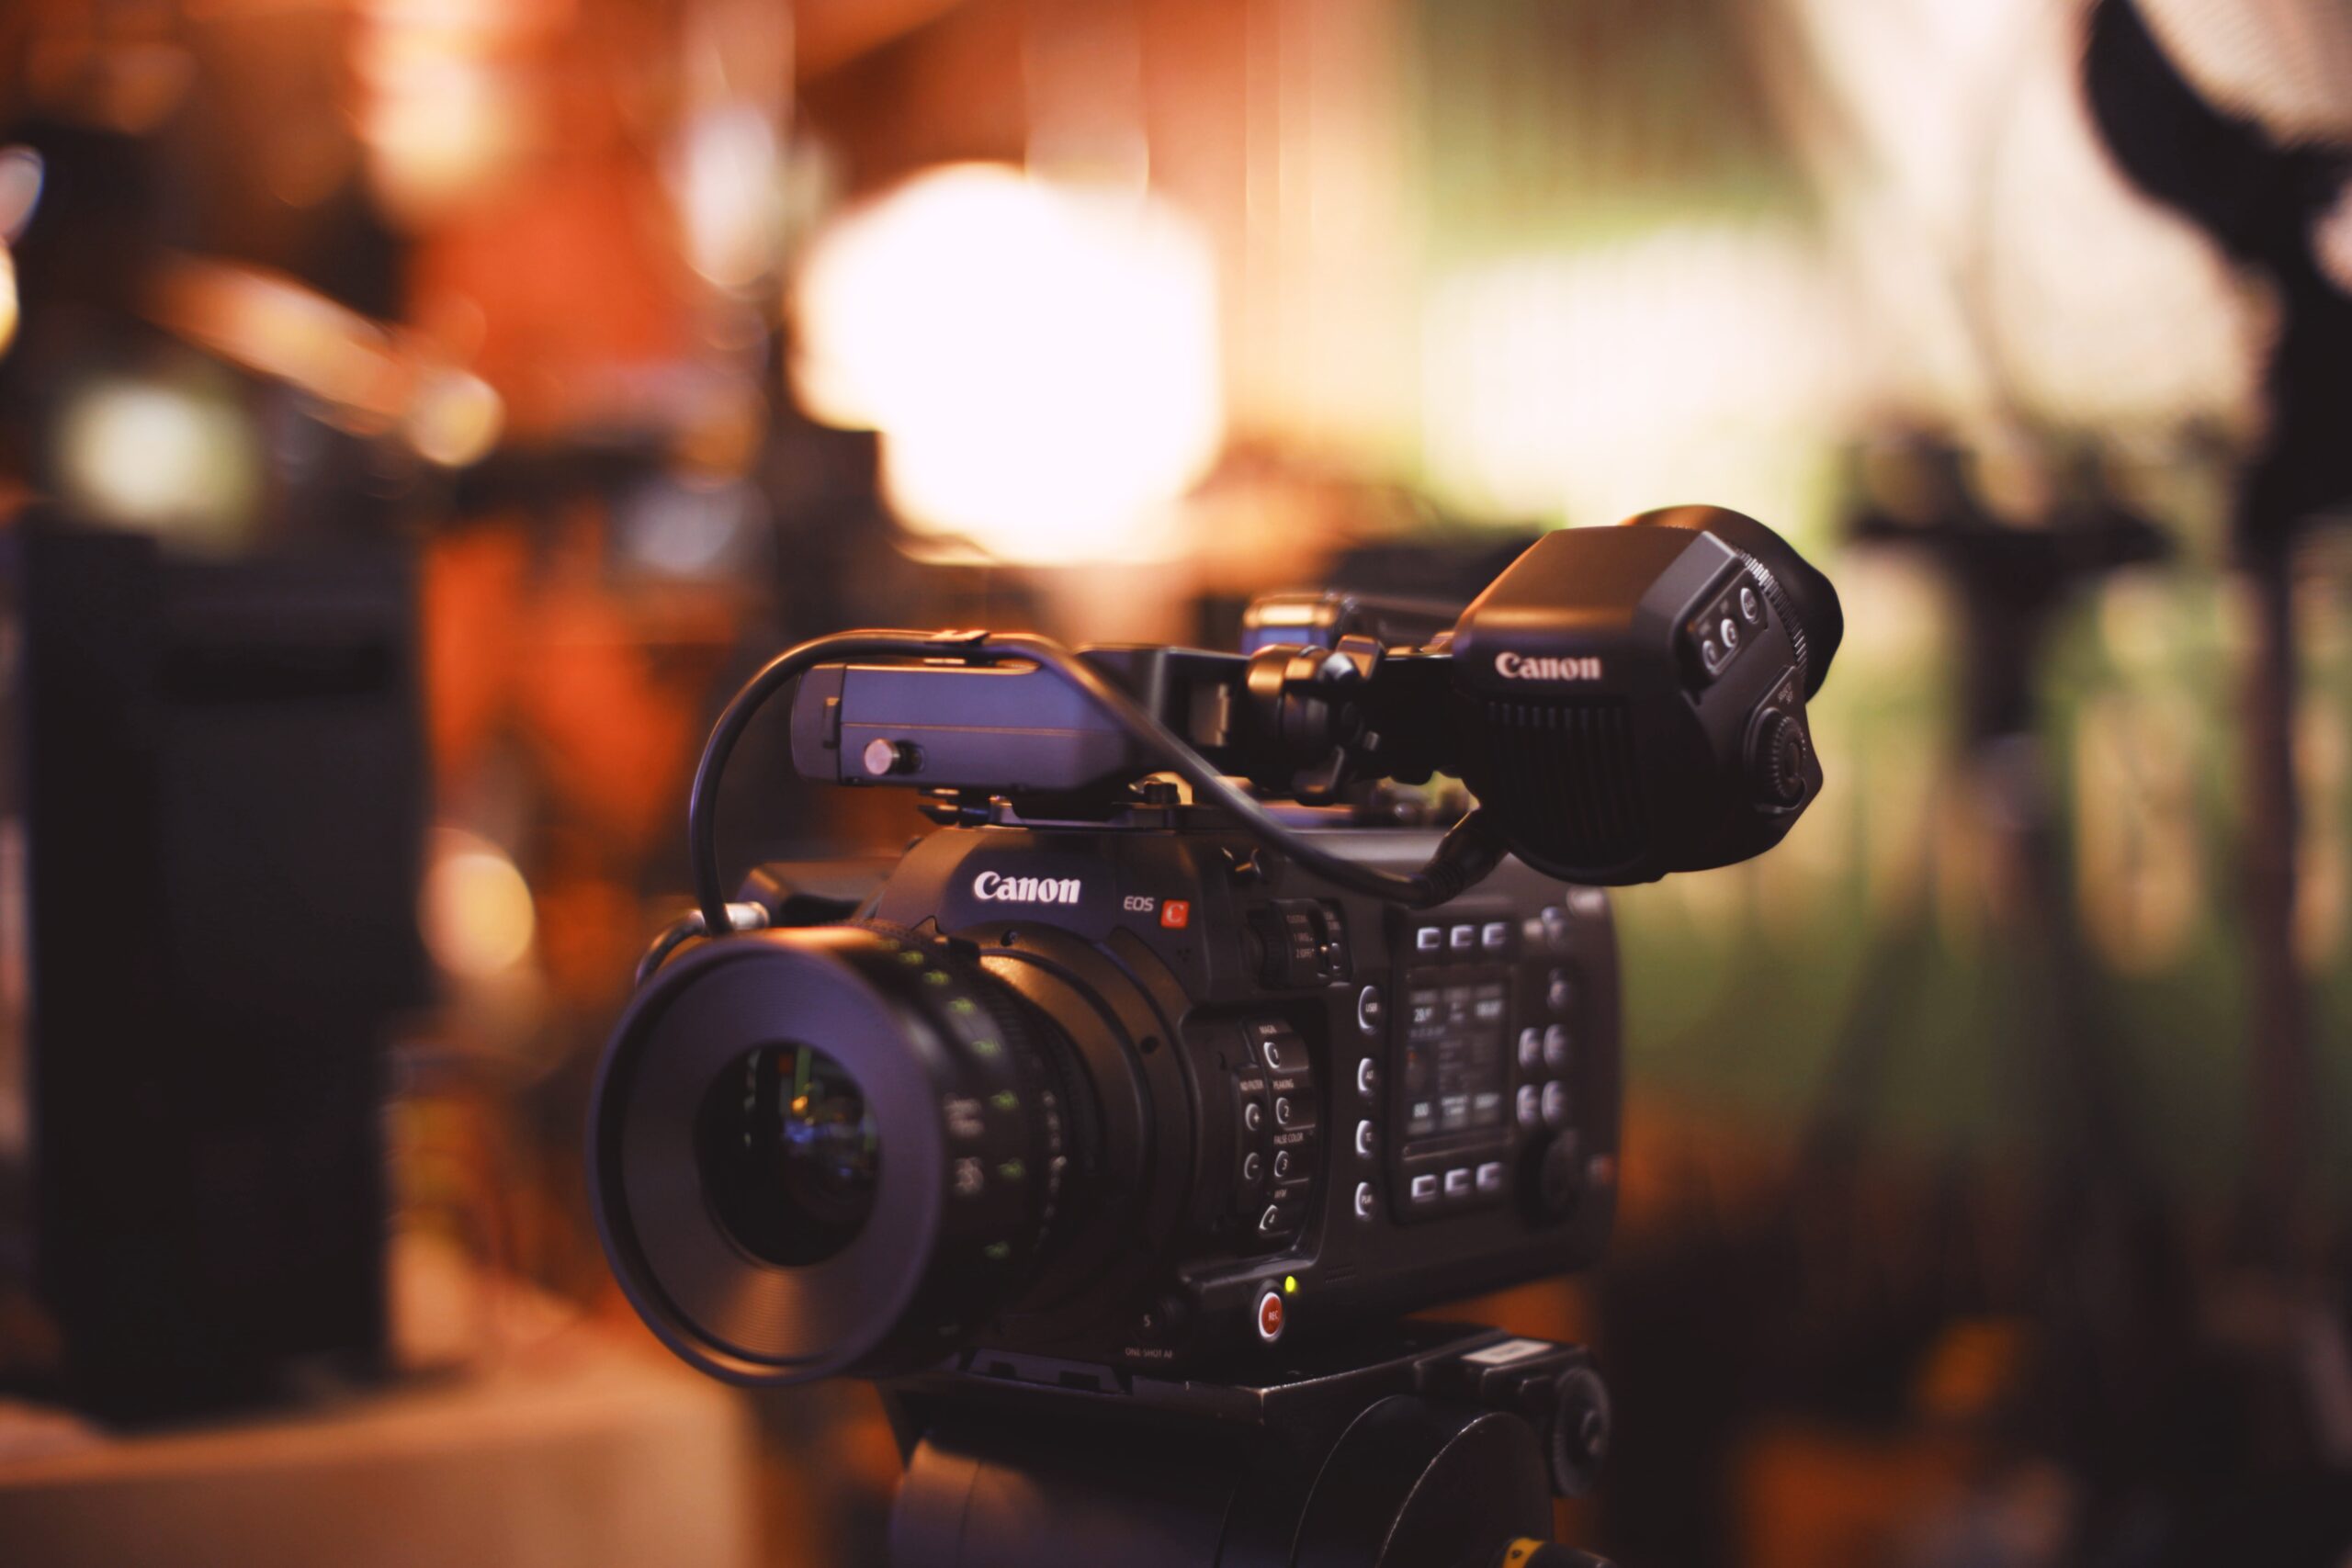 Solutions to creating and distributing enterprise video